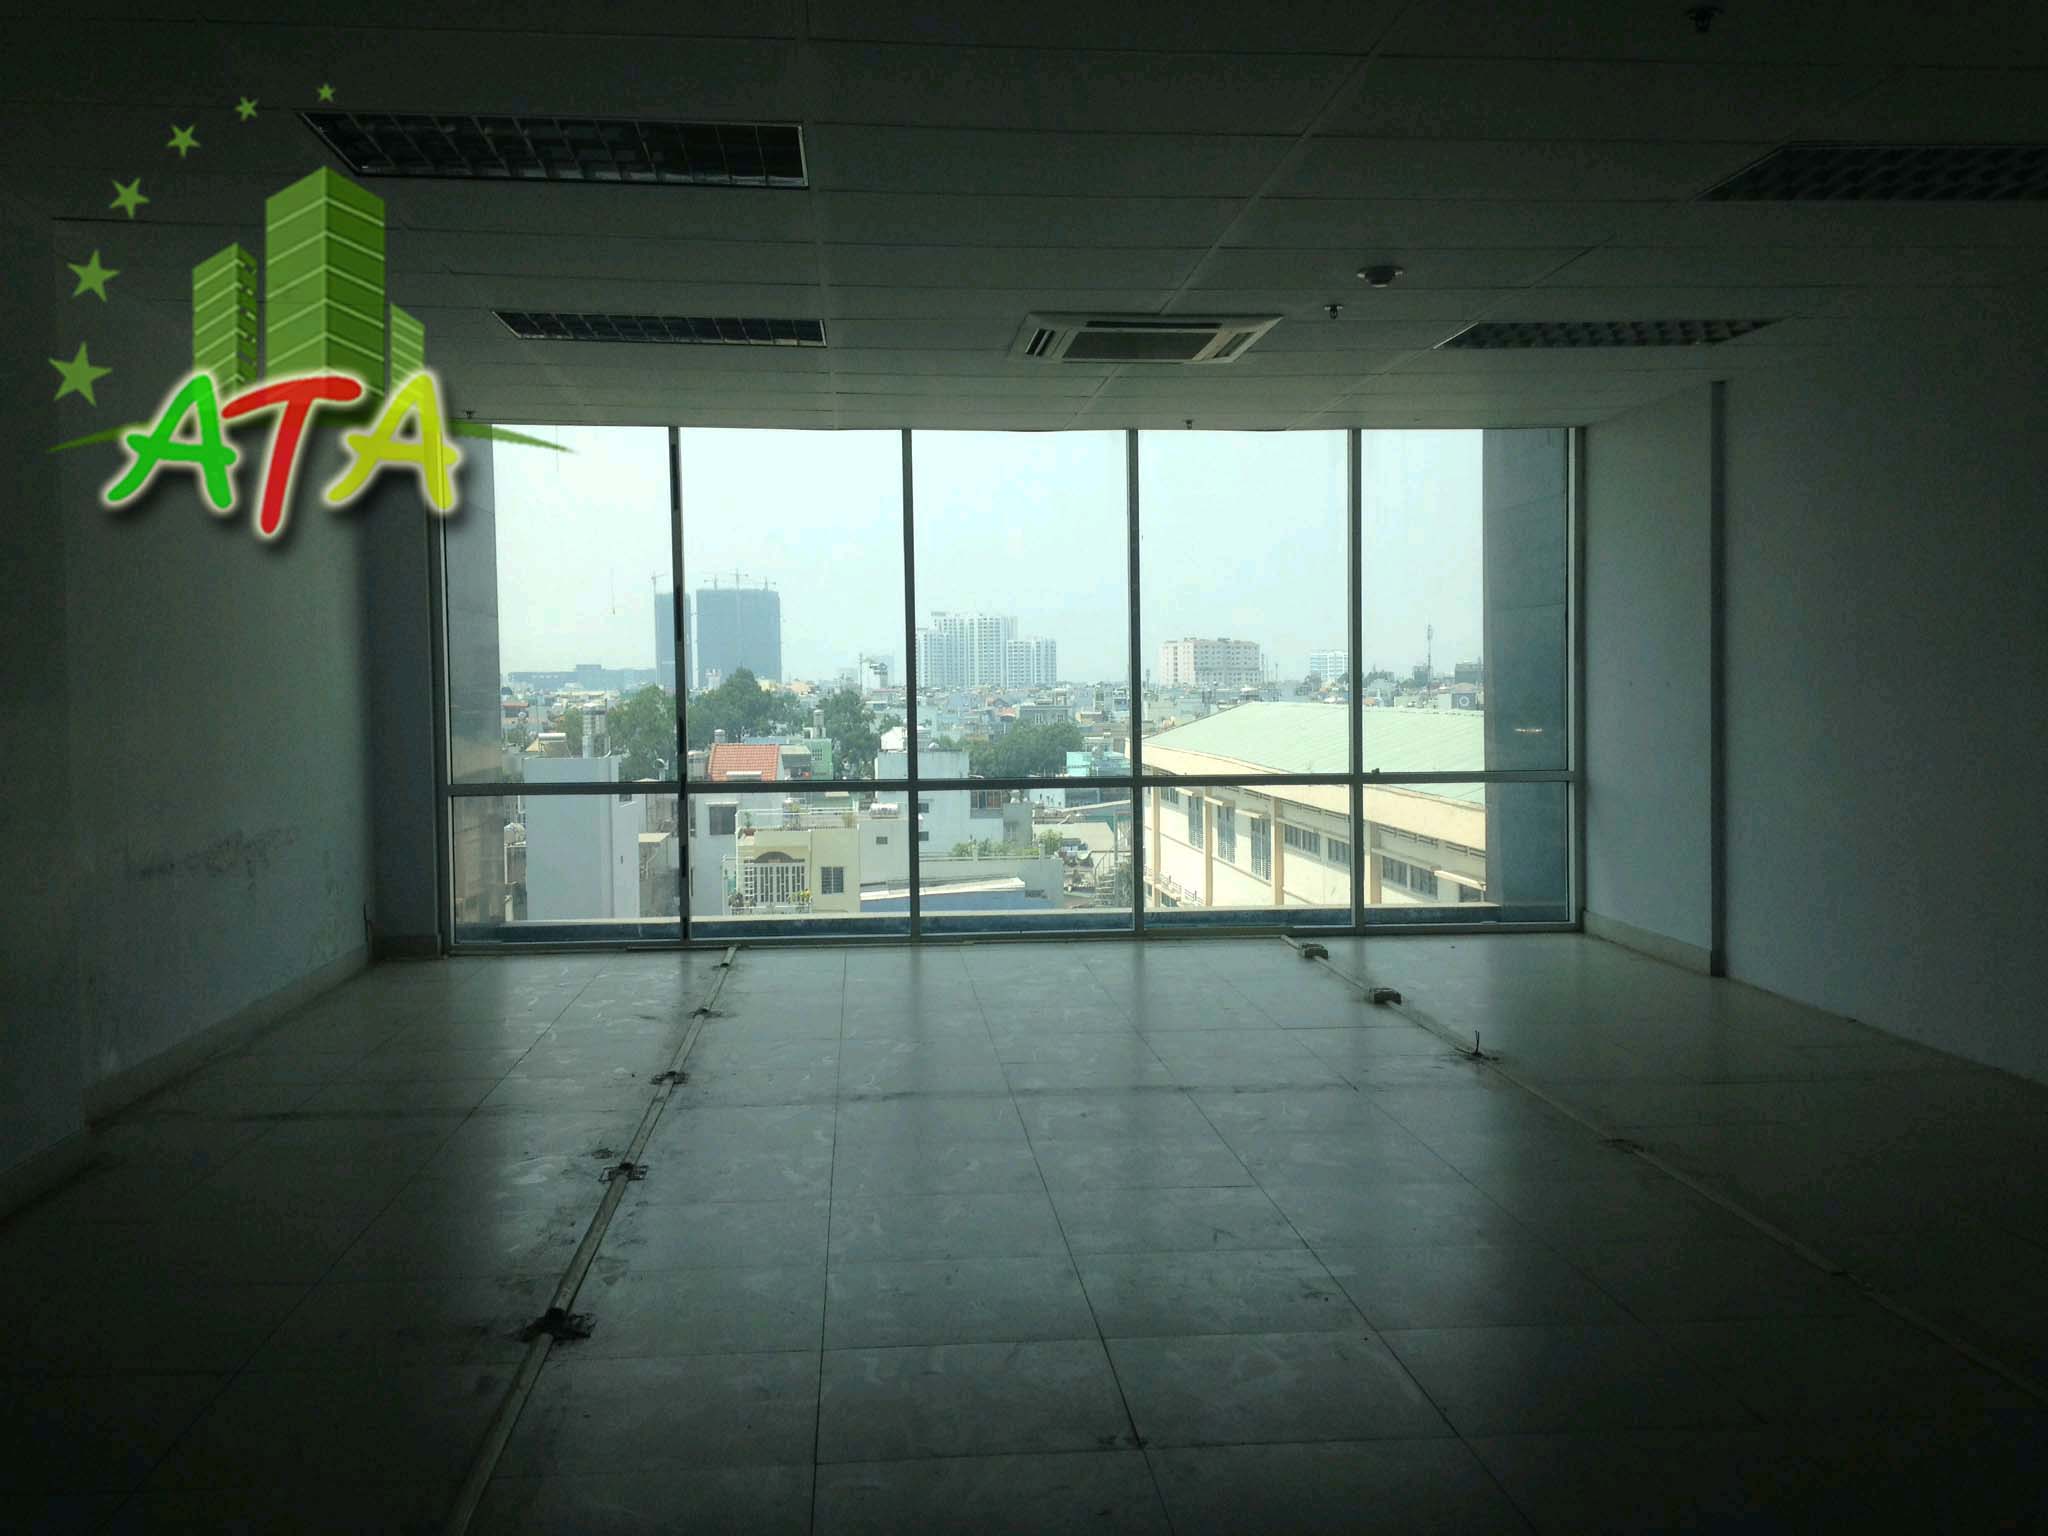 văn phòng cho thuê quận 4, CTV Office Building, office for lease in D4, HCMC